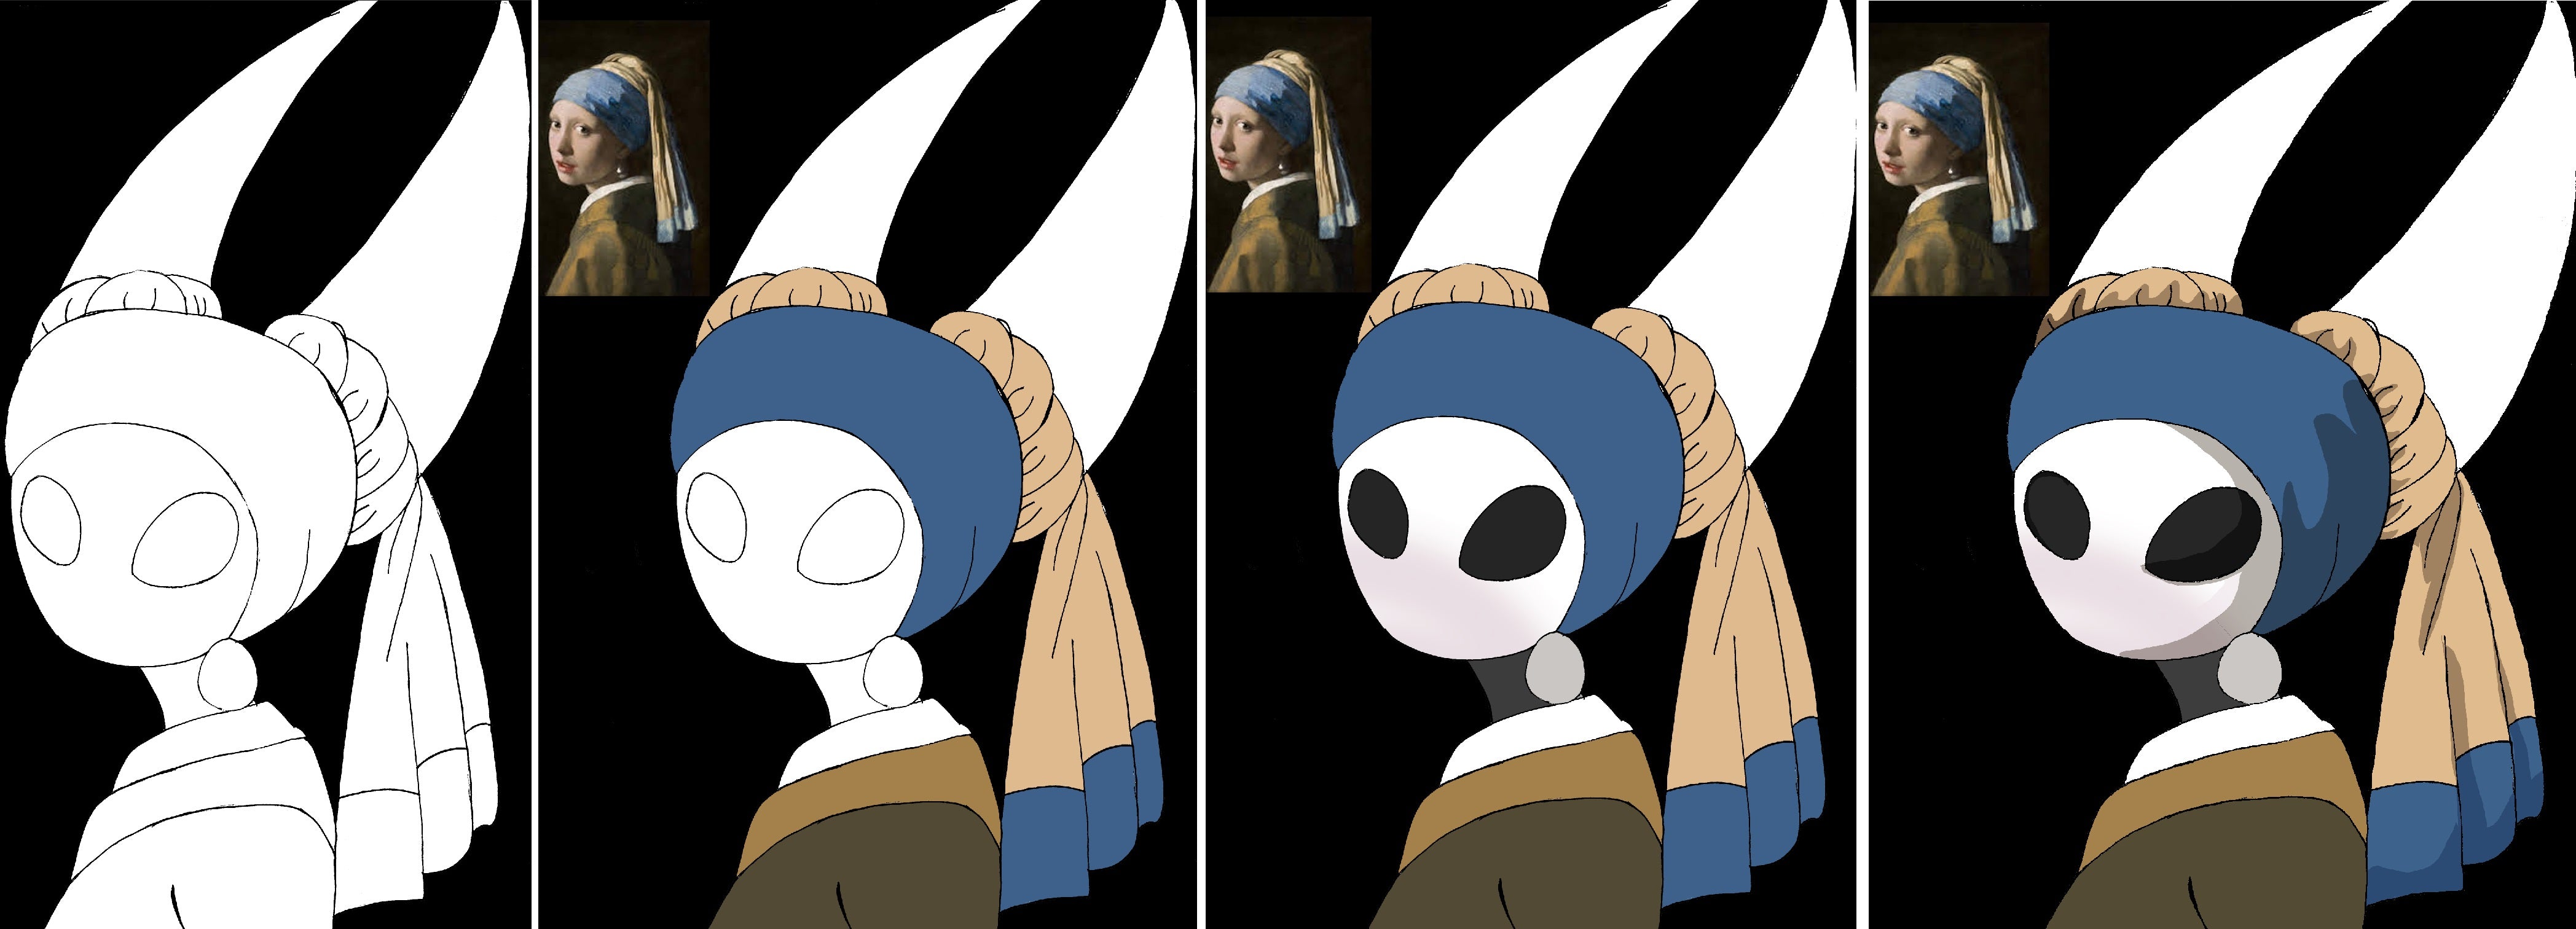 hollow knight silksong, girl with a pearl earring parody, artsy sister teresita blanco